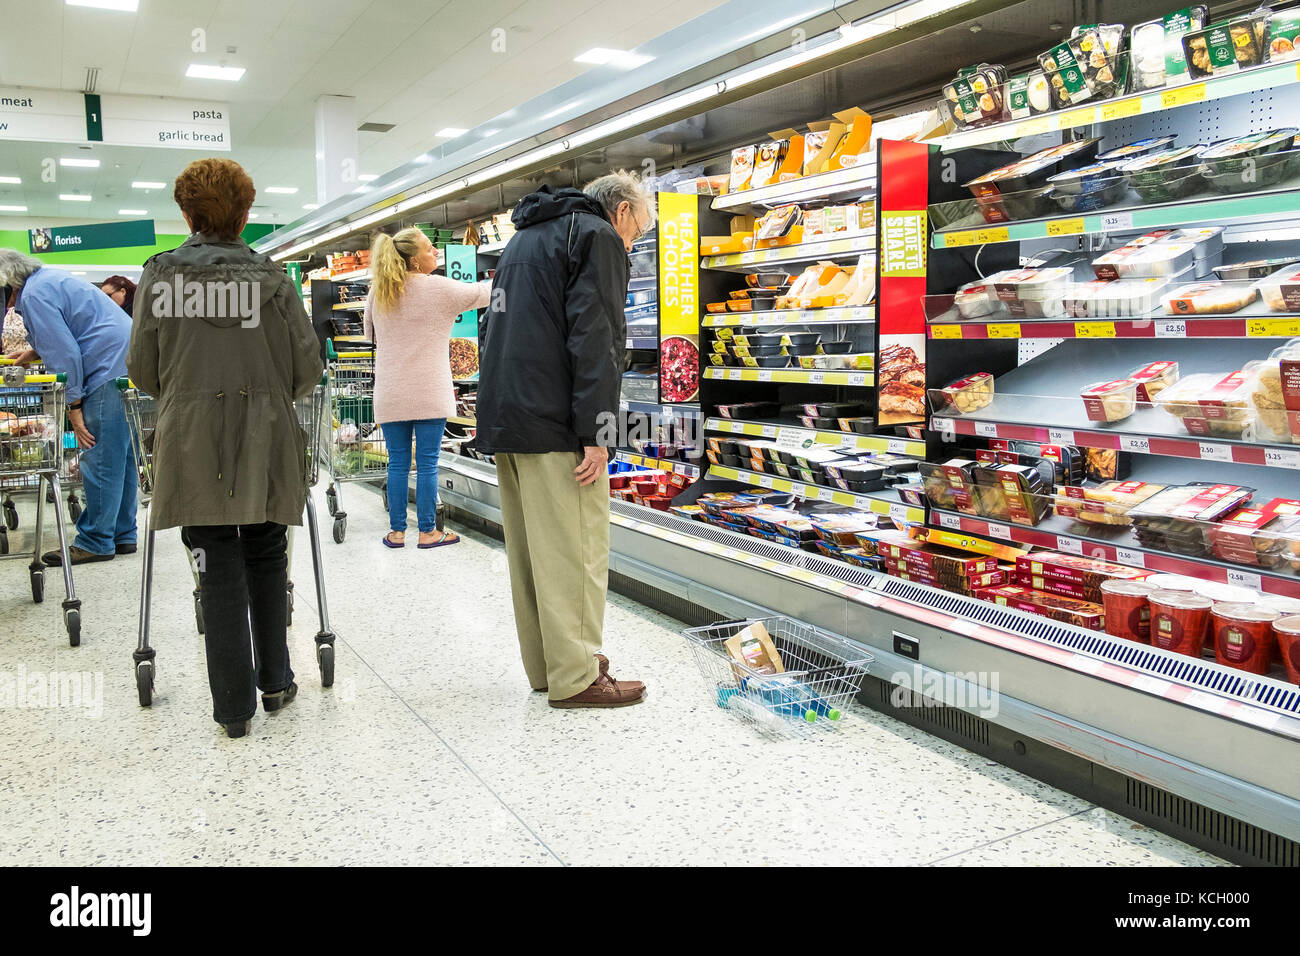 Shopping in a supermarket - shoppers in a Morrisons Supermarket. Stock Photo